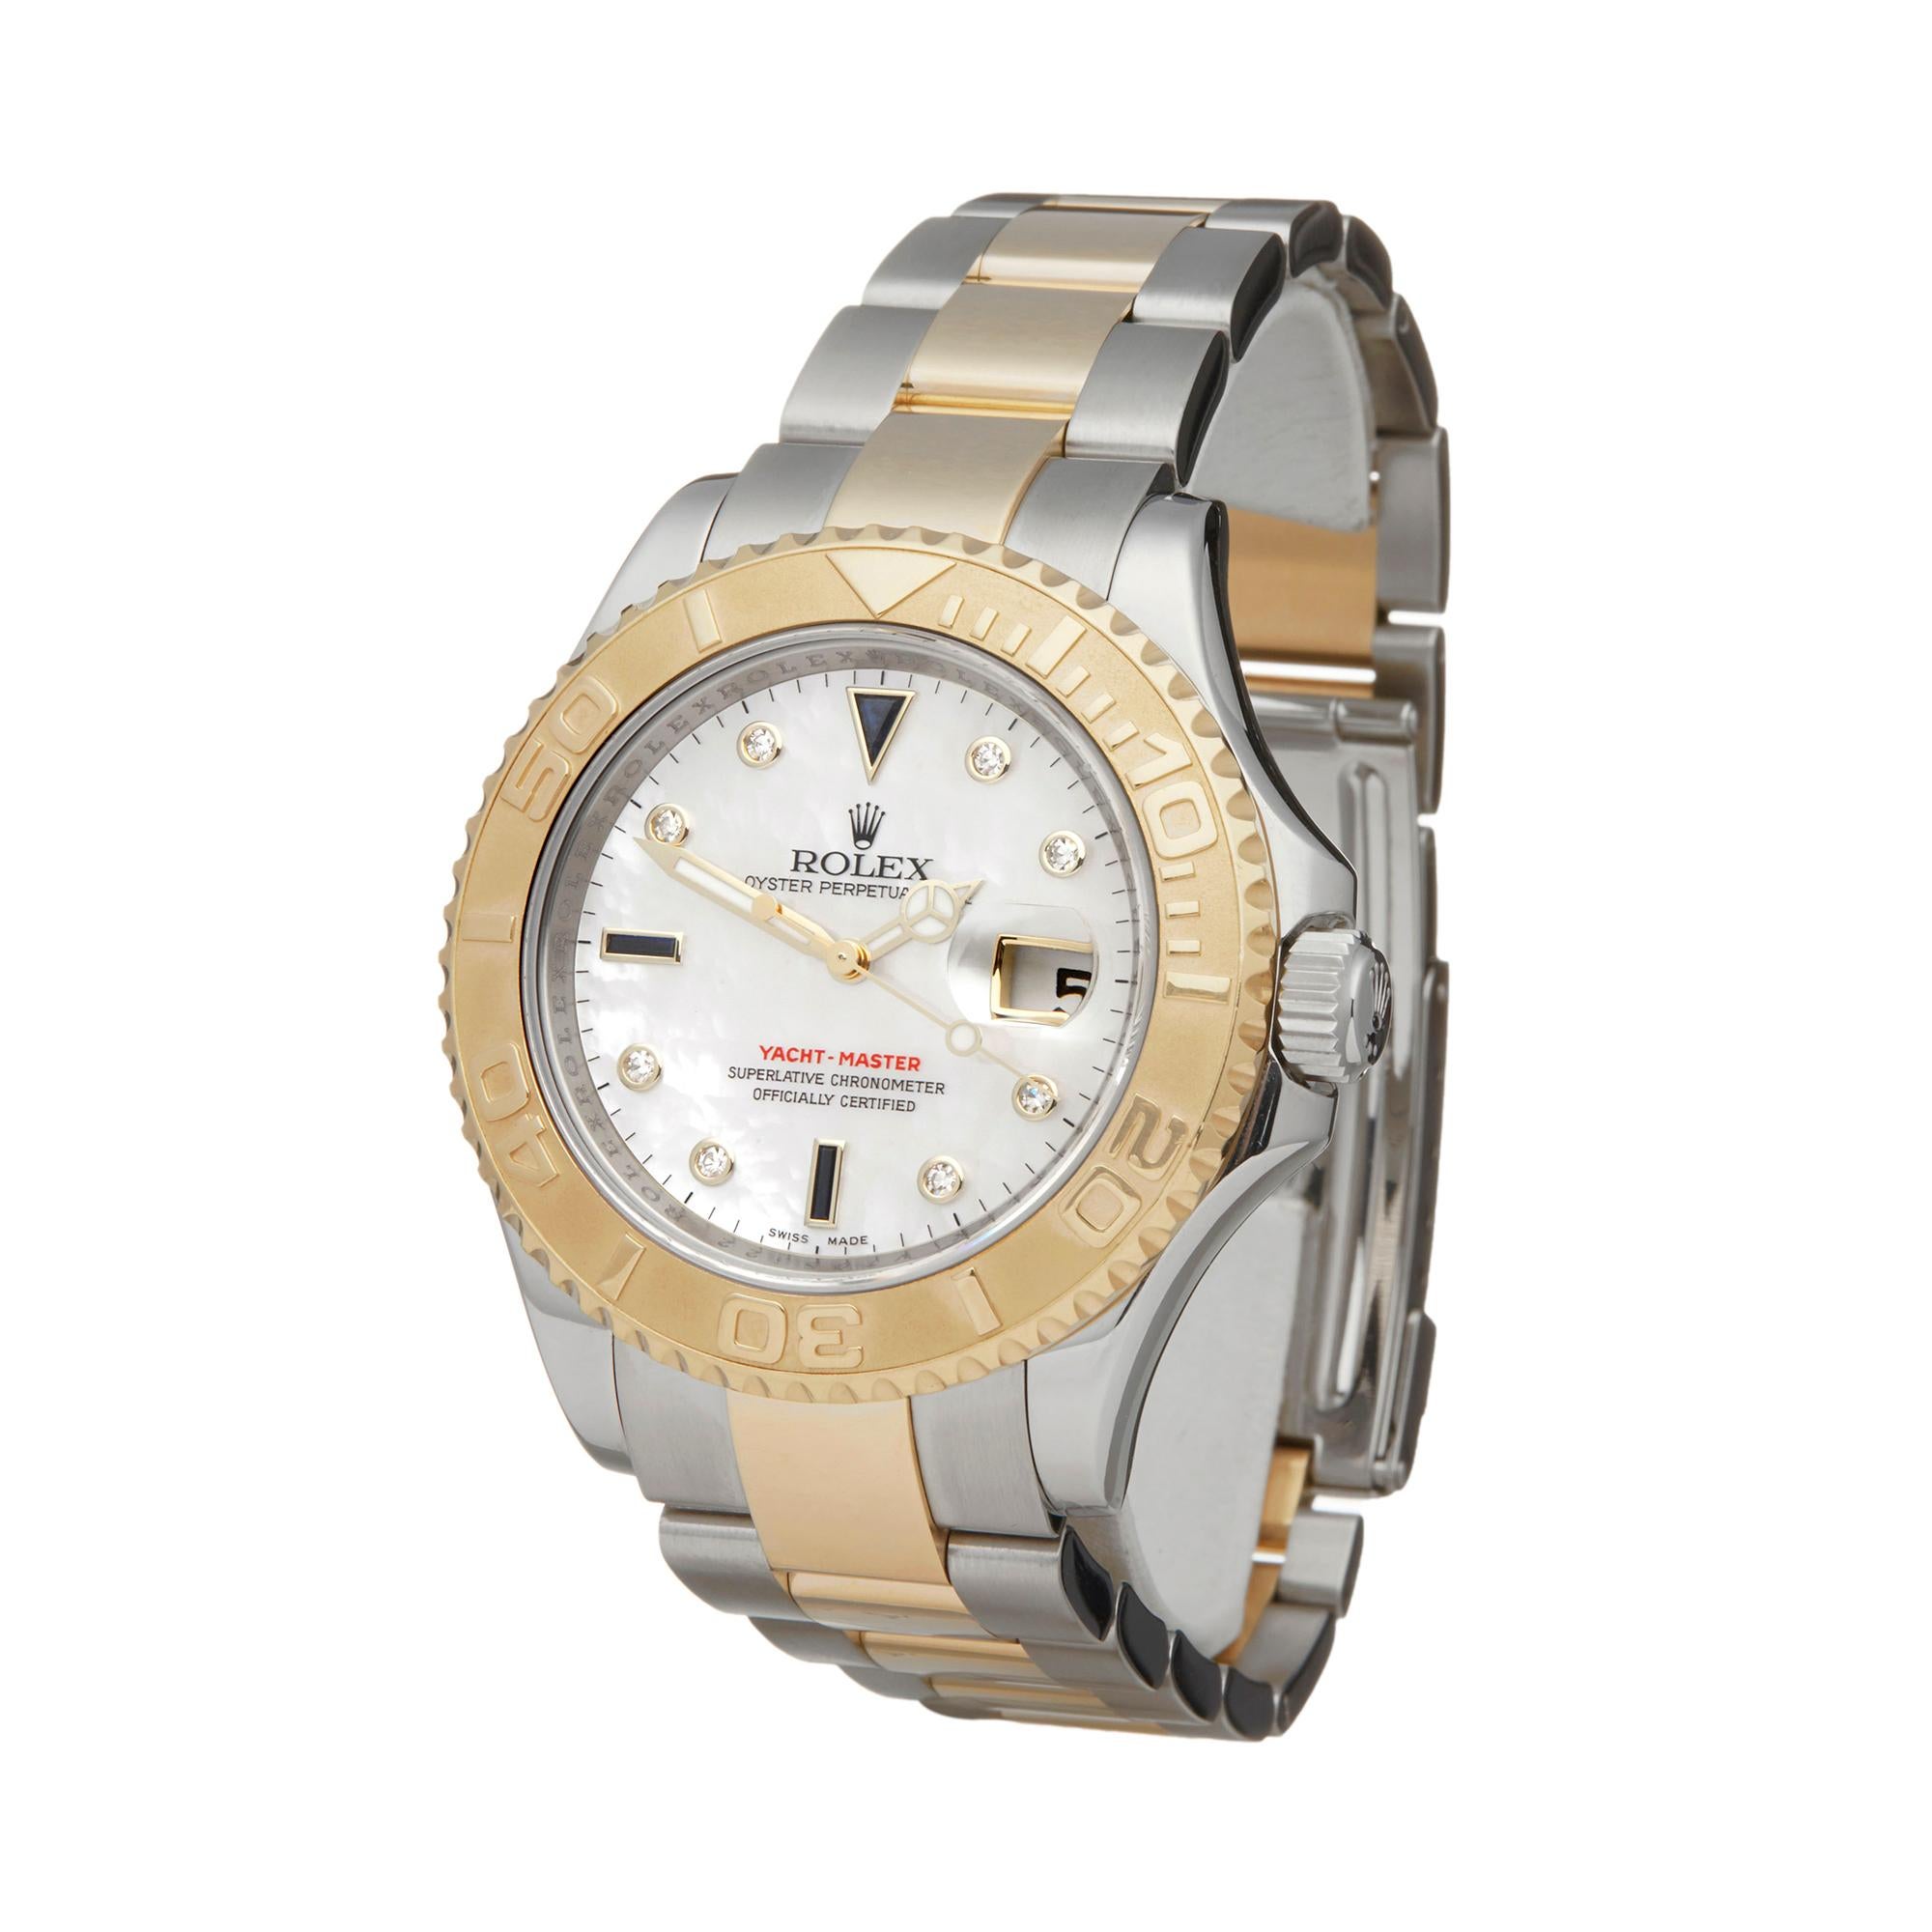 Reference: W6085
Manufacturer: Rolex
Model: Yacht-Master
Model Reference: 16623
Age: 10th October 2010
Gender: Men's
Box and Papers: Box, Manuals, Guarantee and Swing Tags
Dial: Mother Of Pearl Diamond
Glass: Sapphire Crystal
Movement: